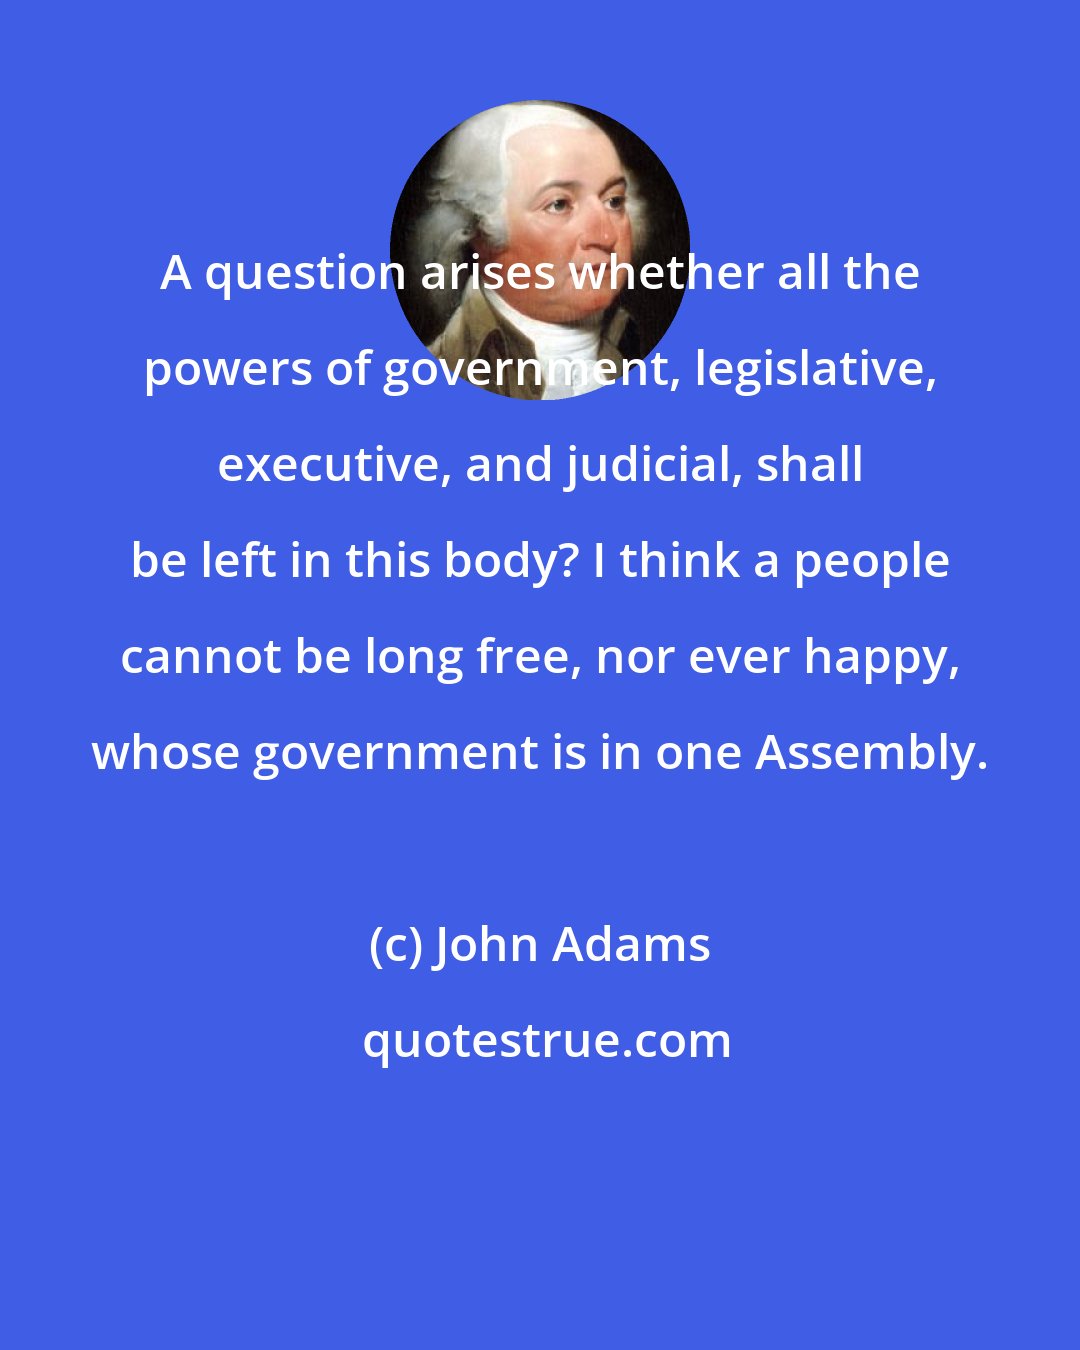 John Adams: A question arises whether all the powers of government, legislative, executive, and judicial, shall be left in this body? I think a people cannot be long free, nor ever happy, whose government is in one Assembly.